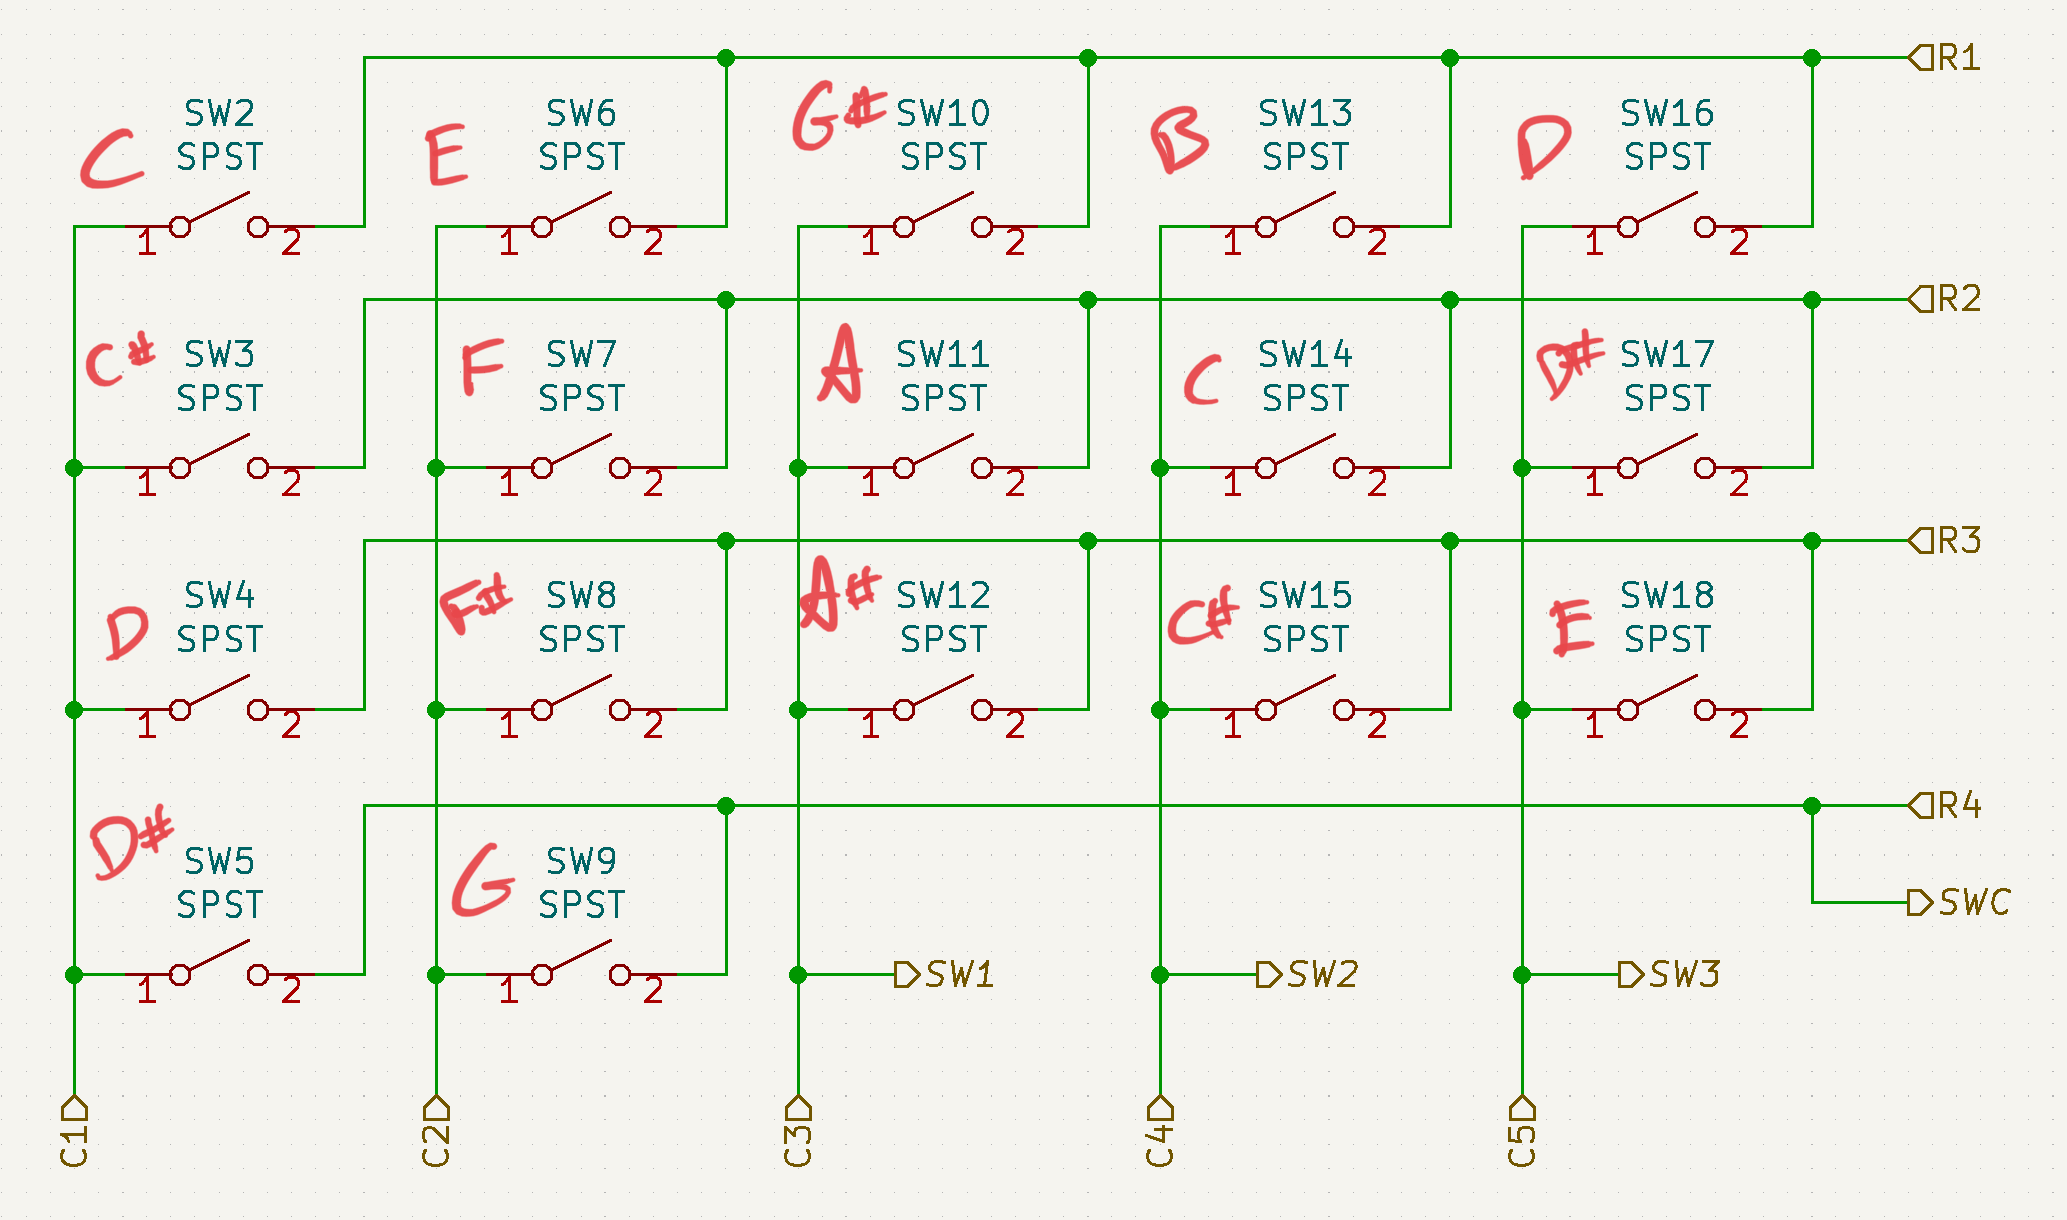 Matrix schematic with switches labelled to their corresponding notes